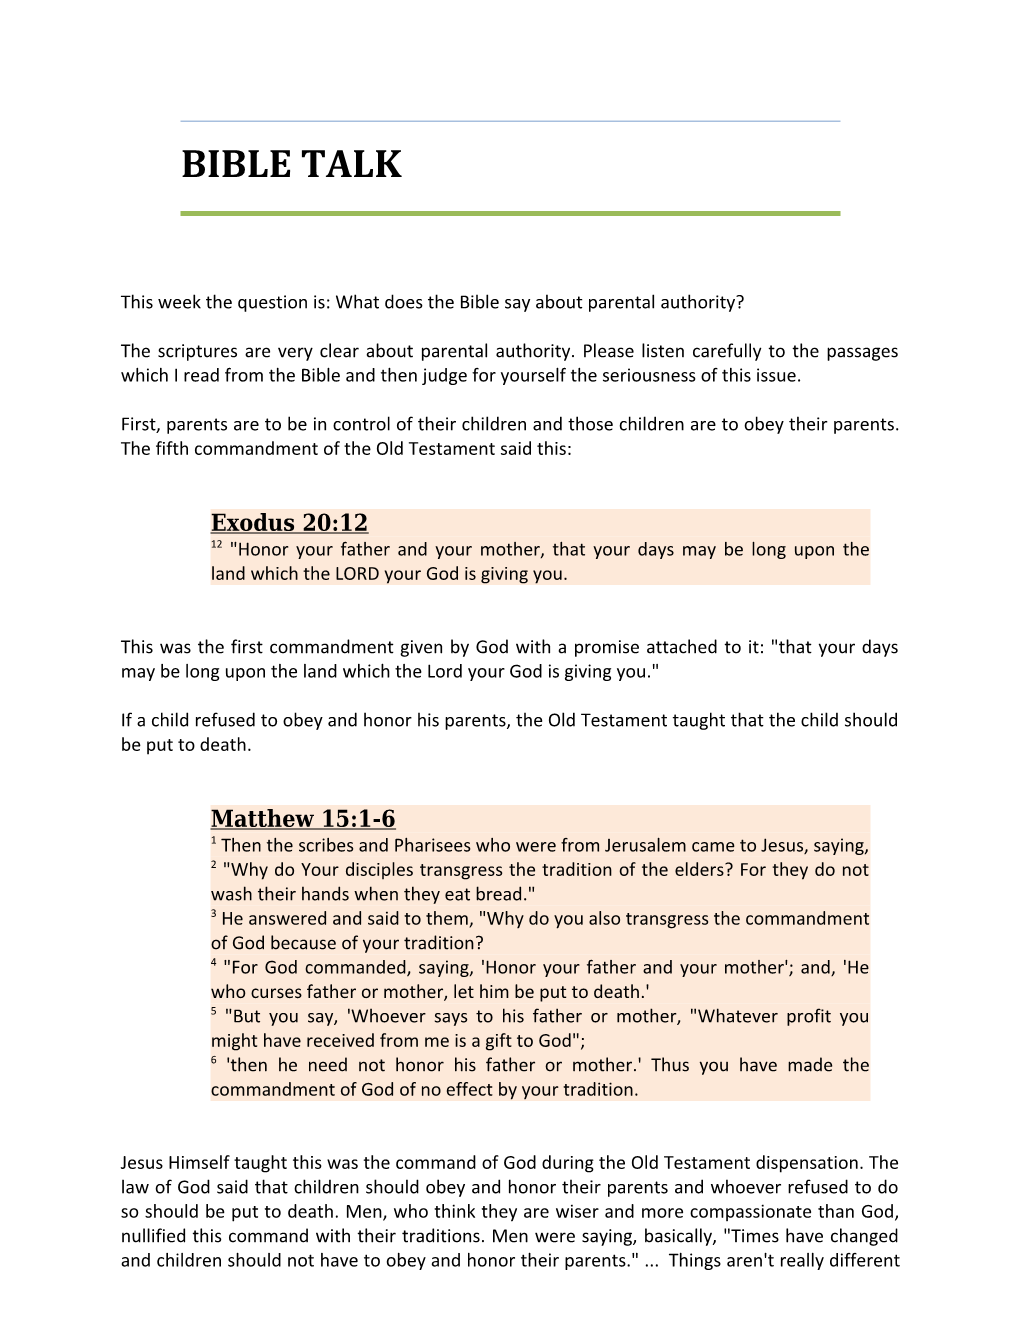 This Week the Question Is: What Does the Bible Say About Parental Authority?